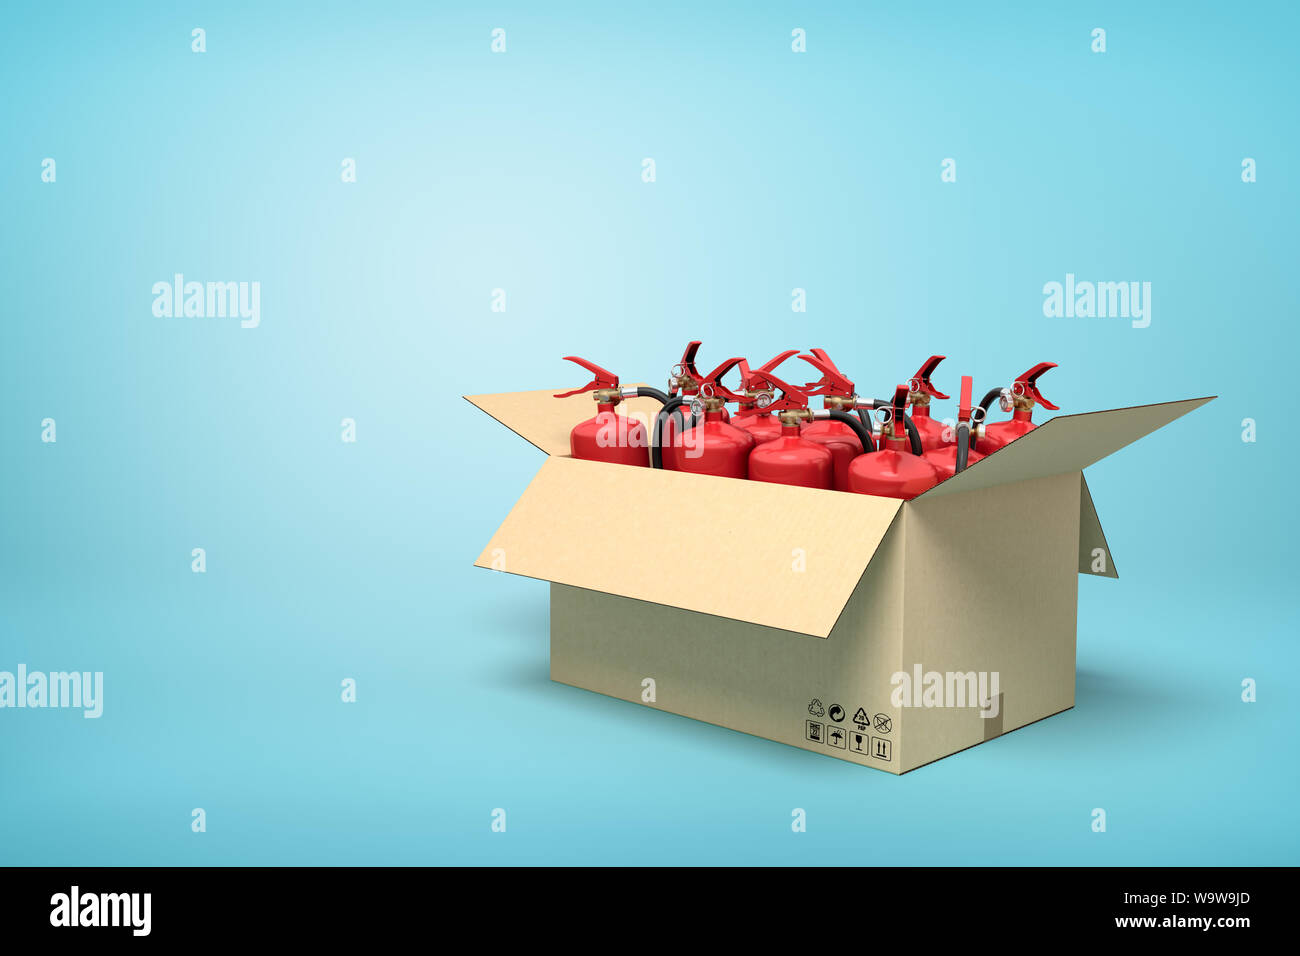 3d rendering of cardboard box full of red fire extinguishers on blue background. Stock Photo